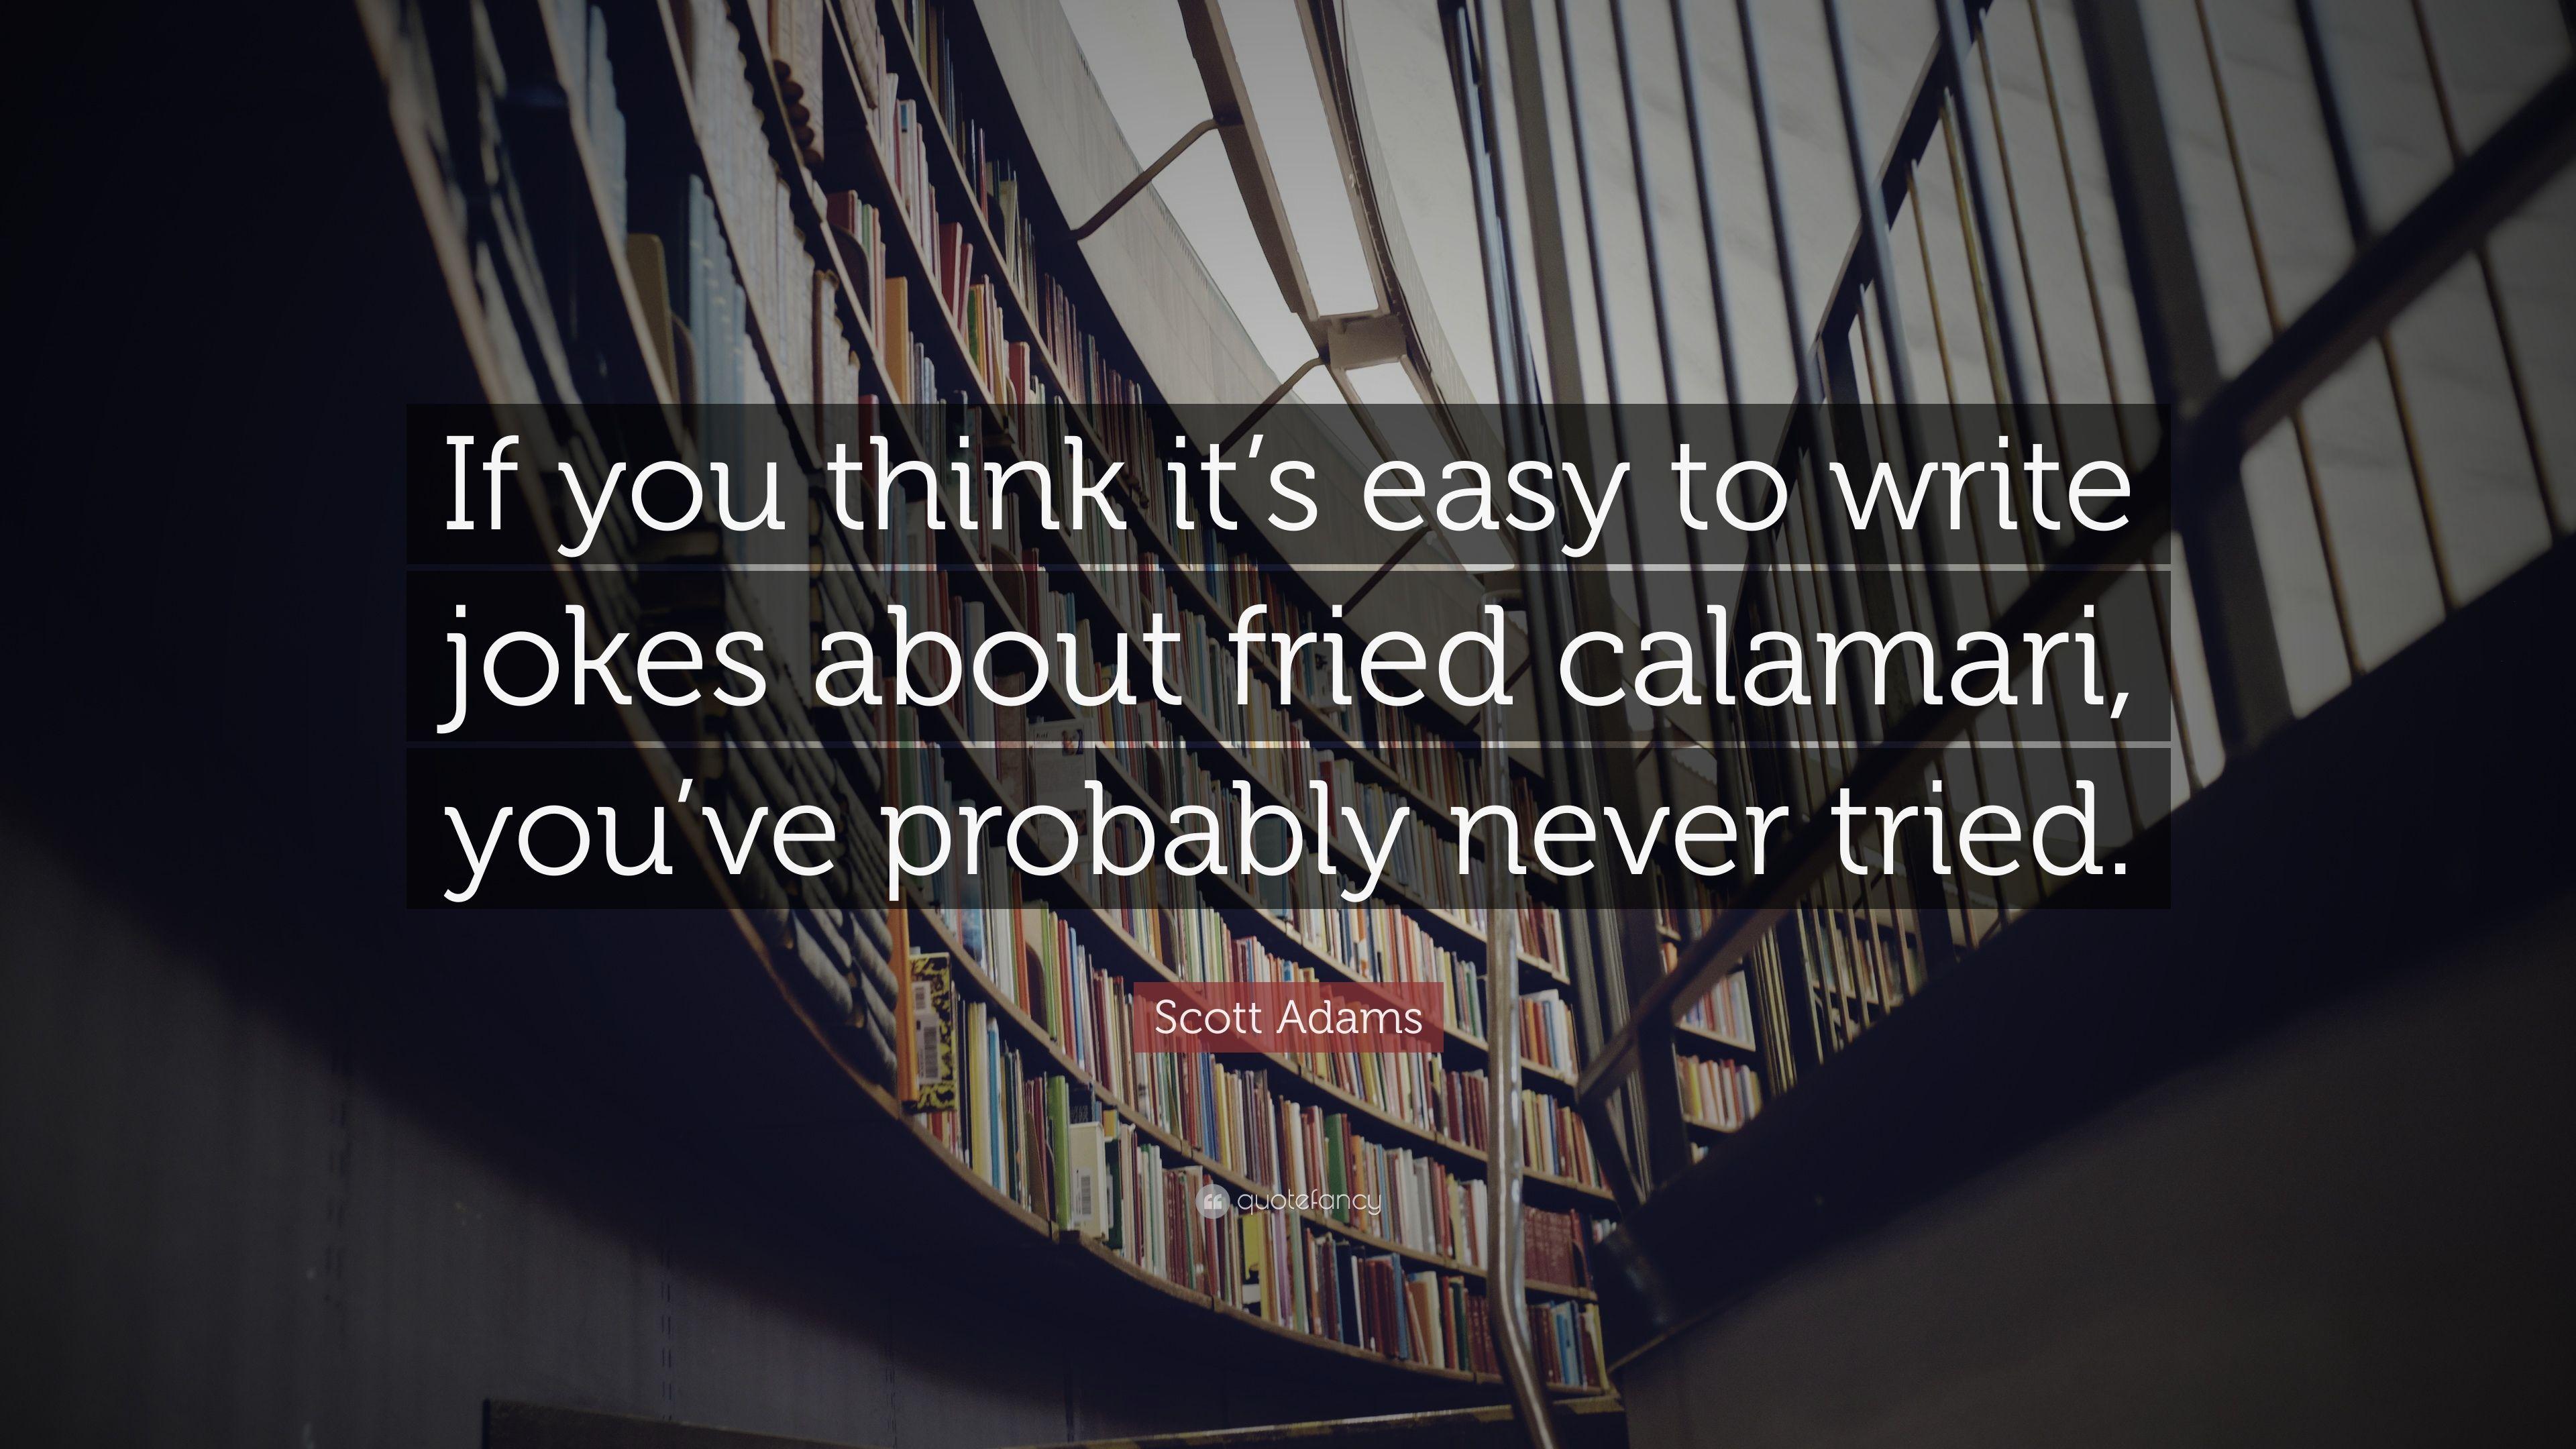 Scott Adams Quote: "If you think it's easy to write jokes about 